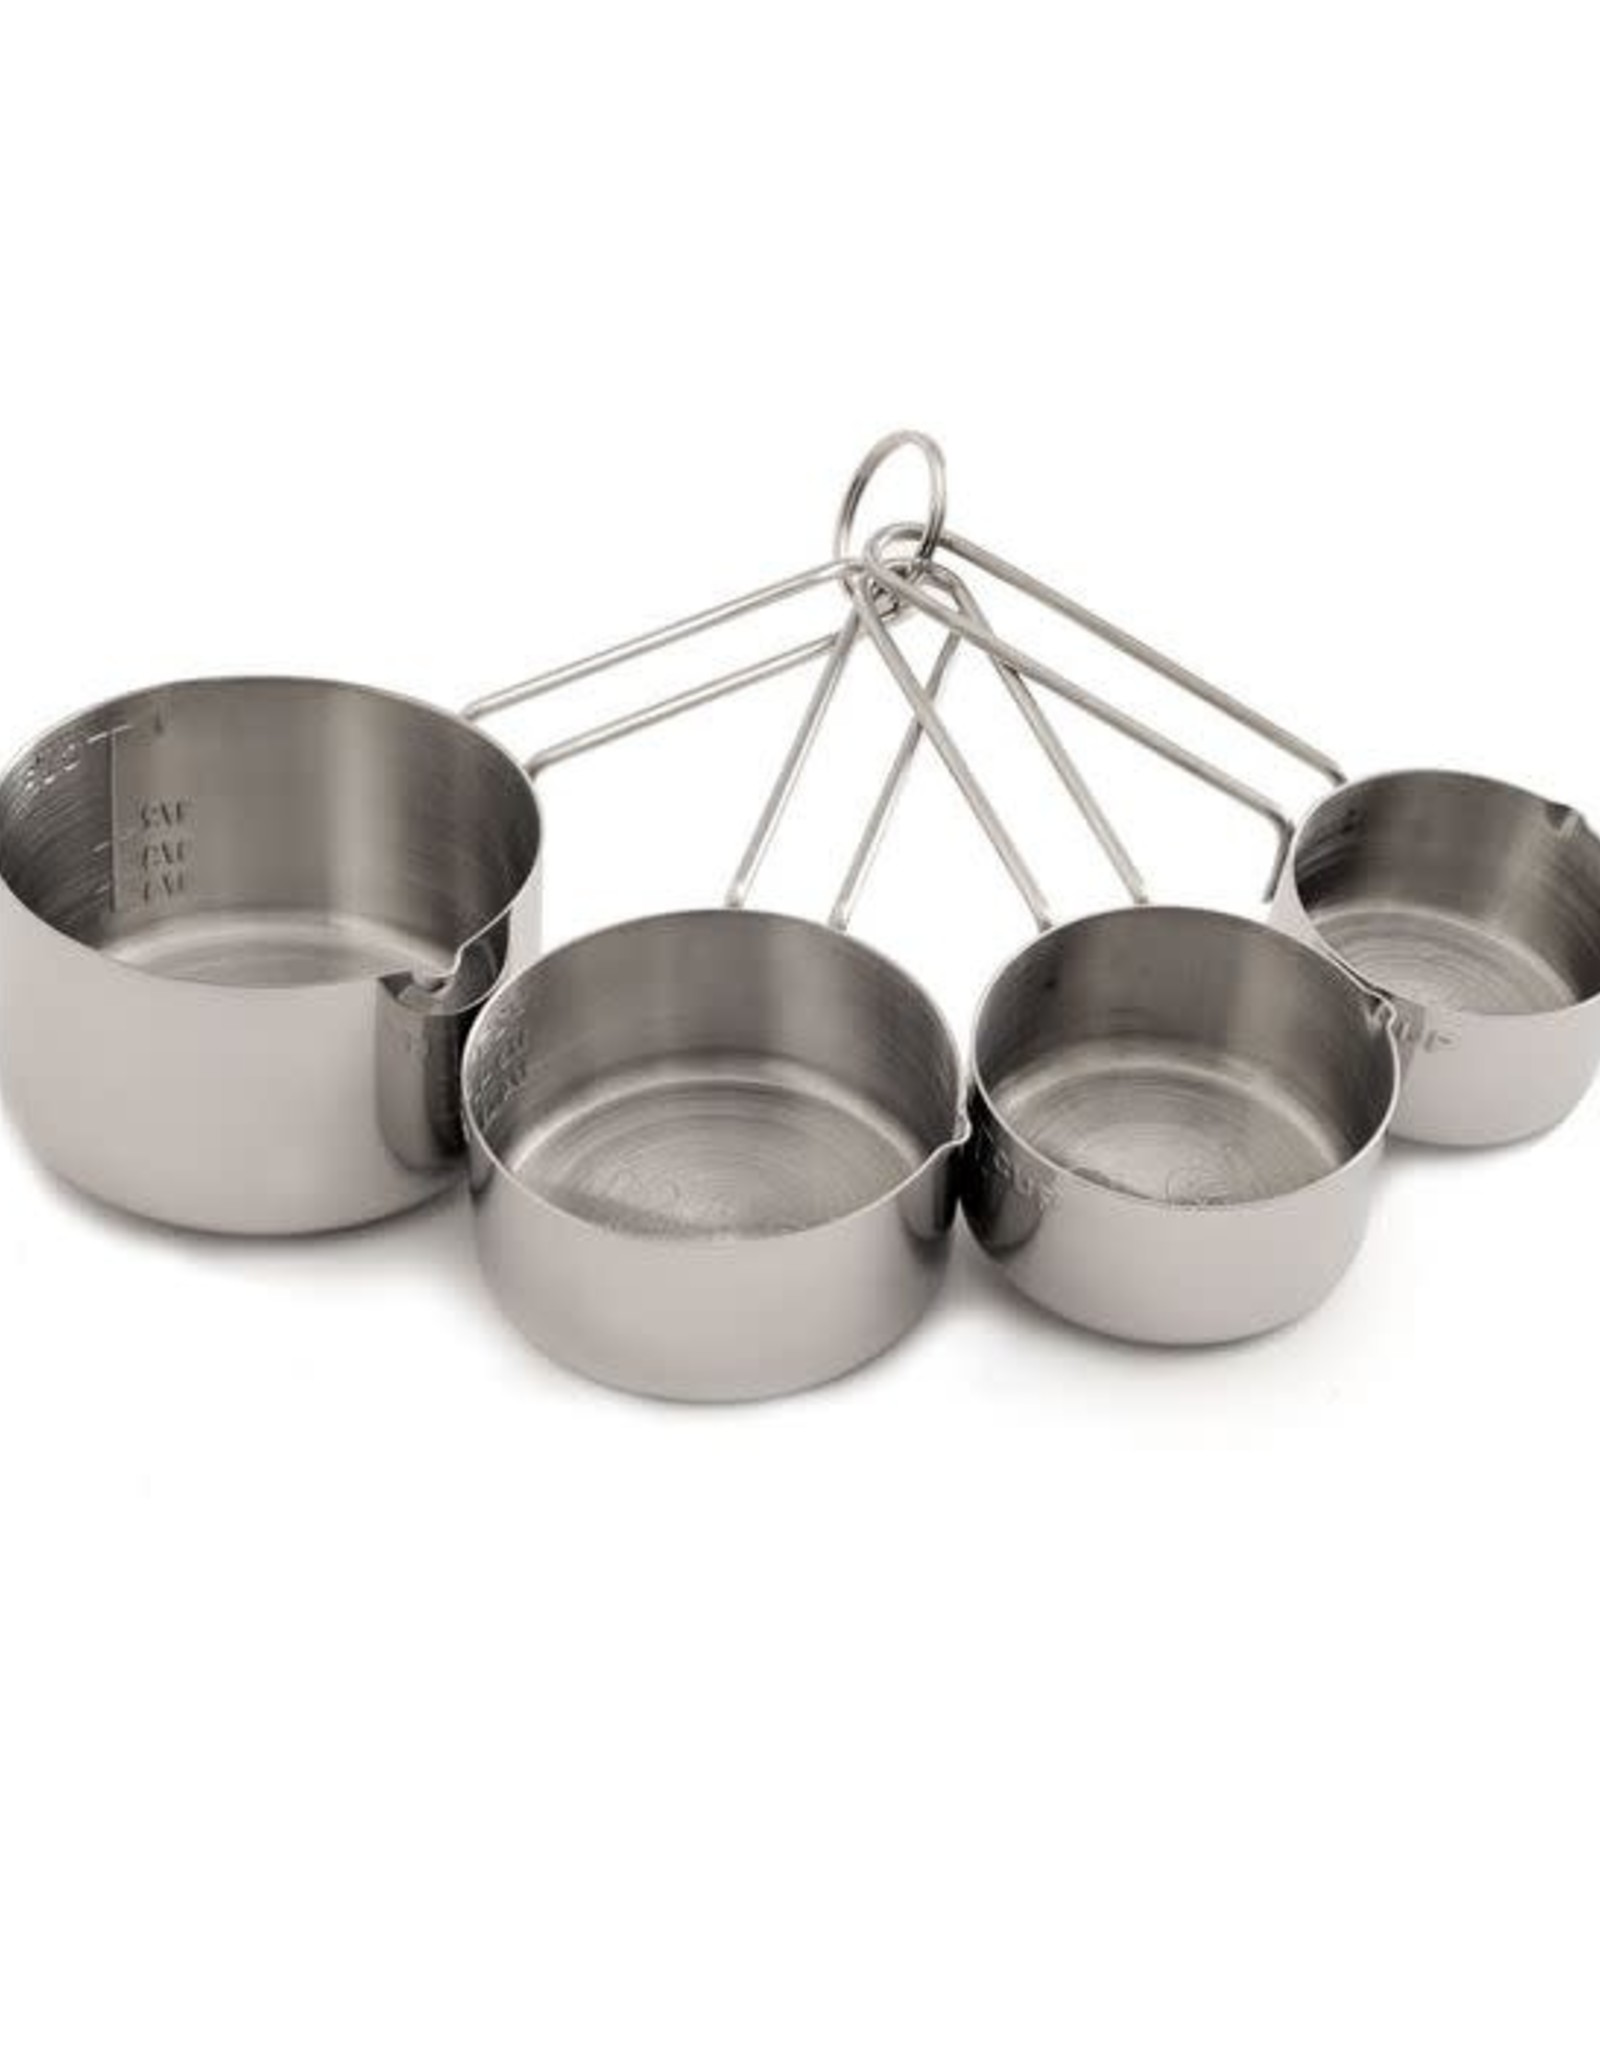 Measuring Cups (Stainless Steel), set of 4